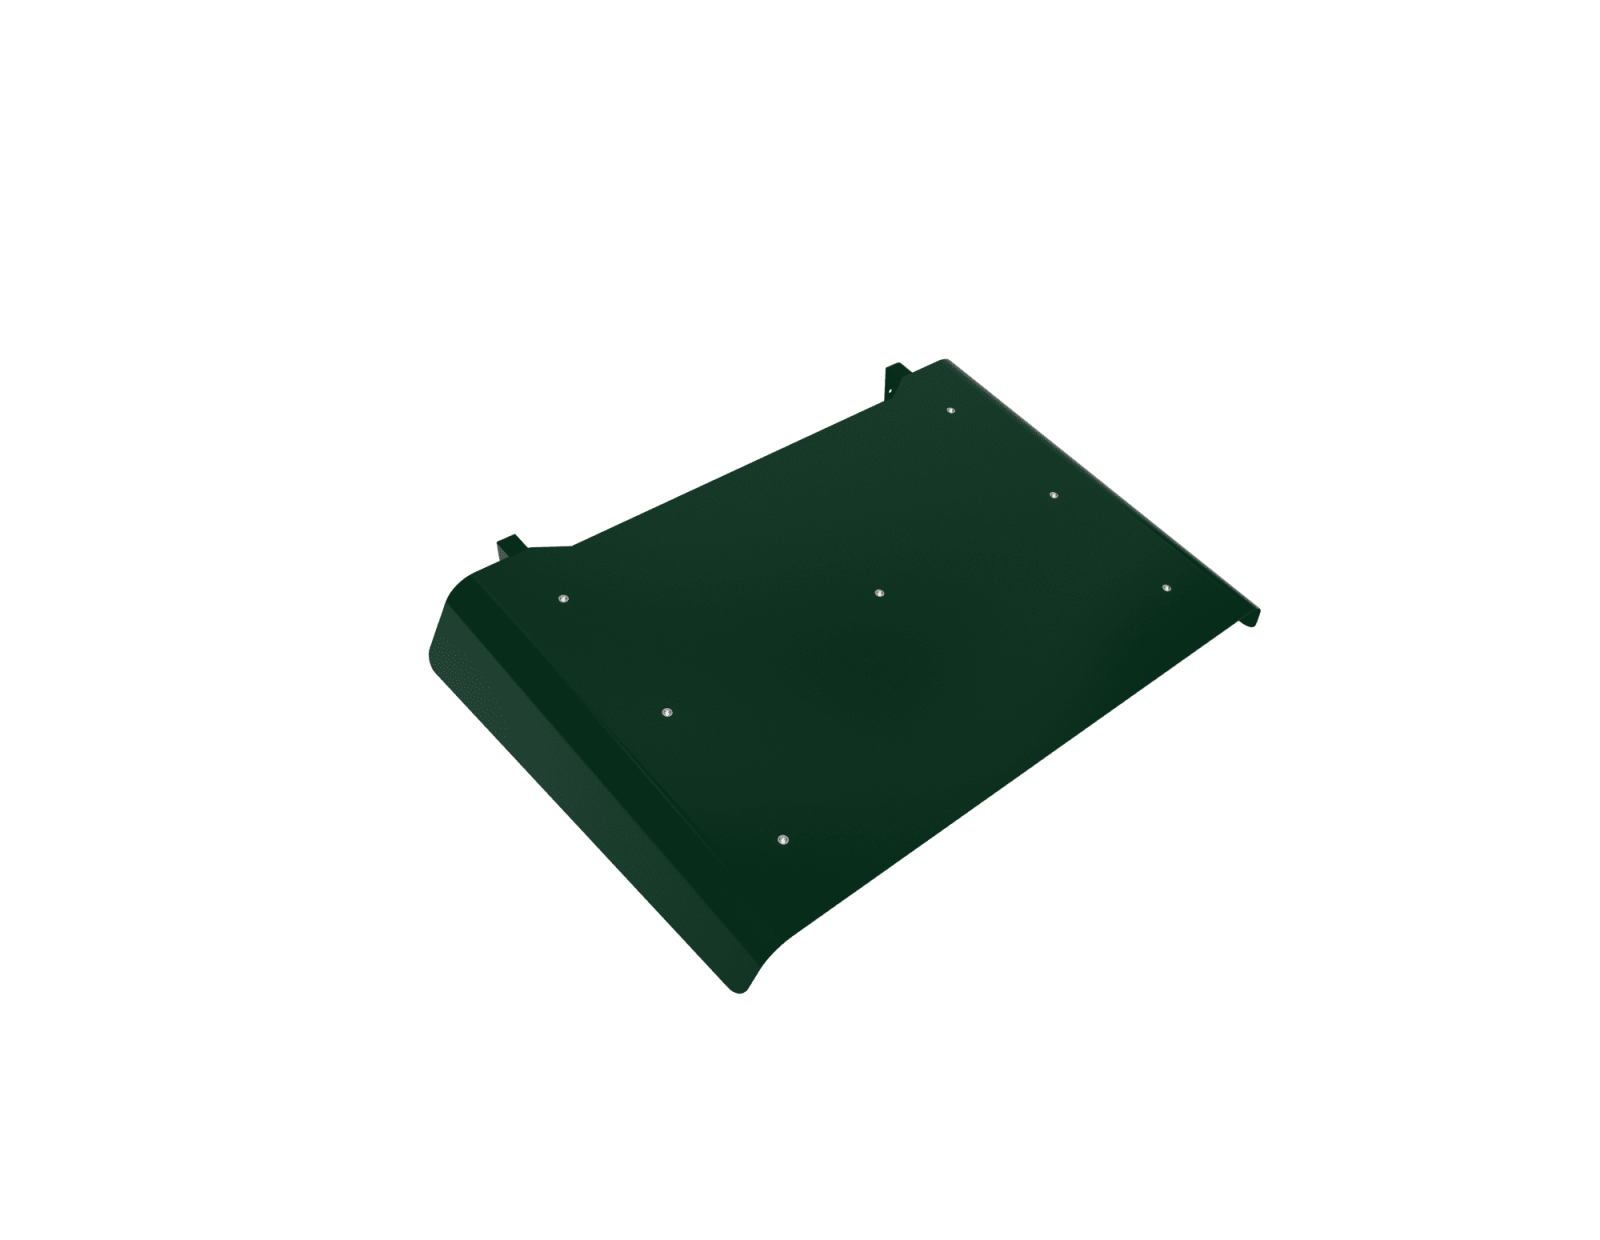 Cache climatisation outsteel cover - vert mousse